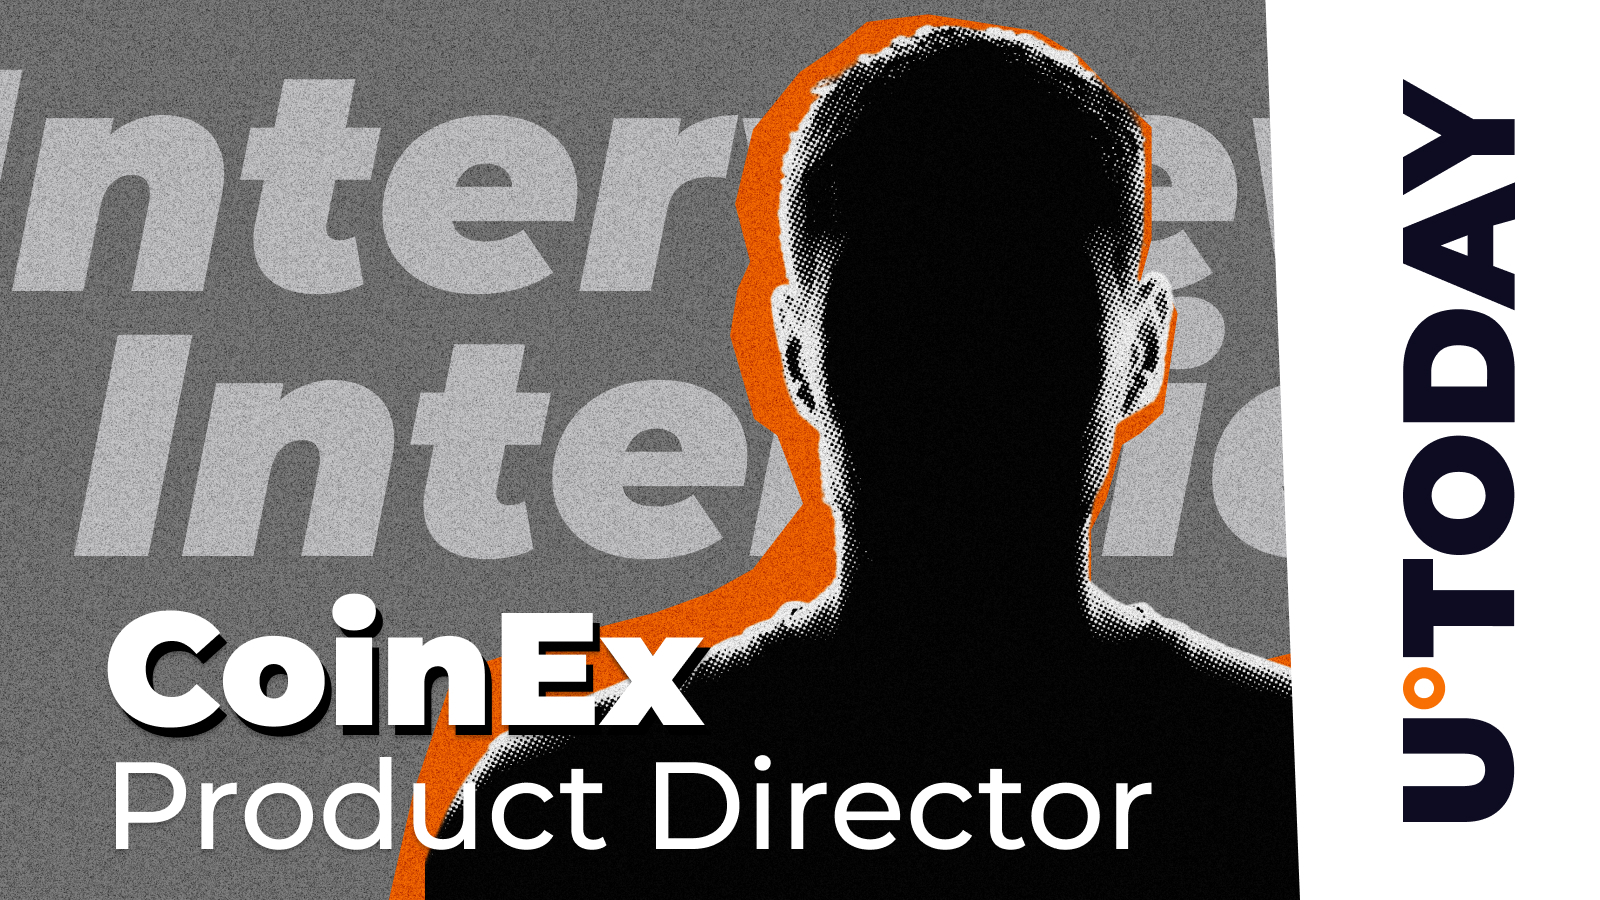 Six Years of CoinEx: Talking with Product Director